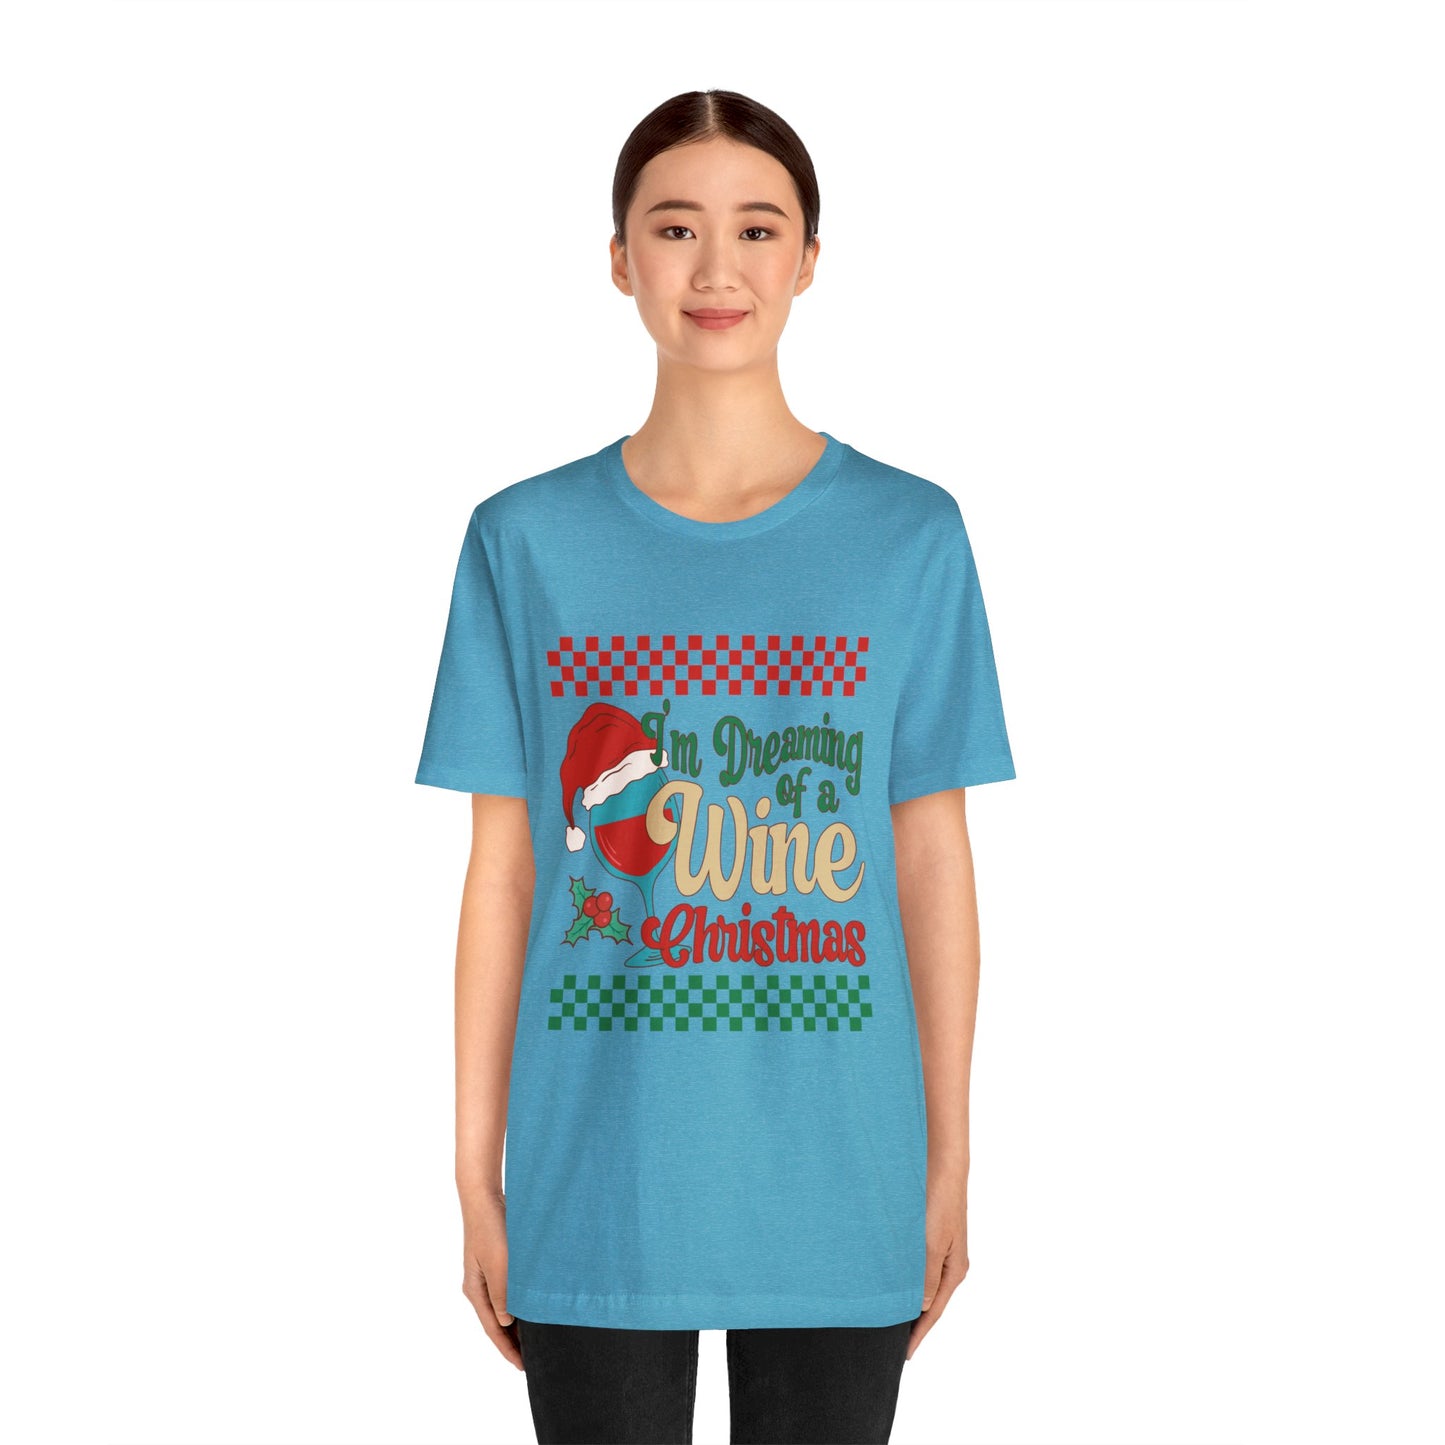 I'm dreaming of a wine Christmas  Women's Short Sleeve funny ChristmasTee